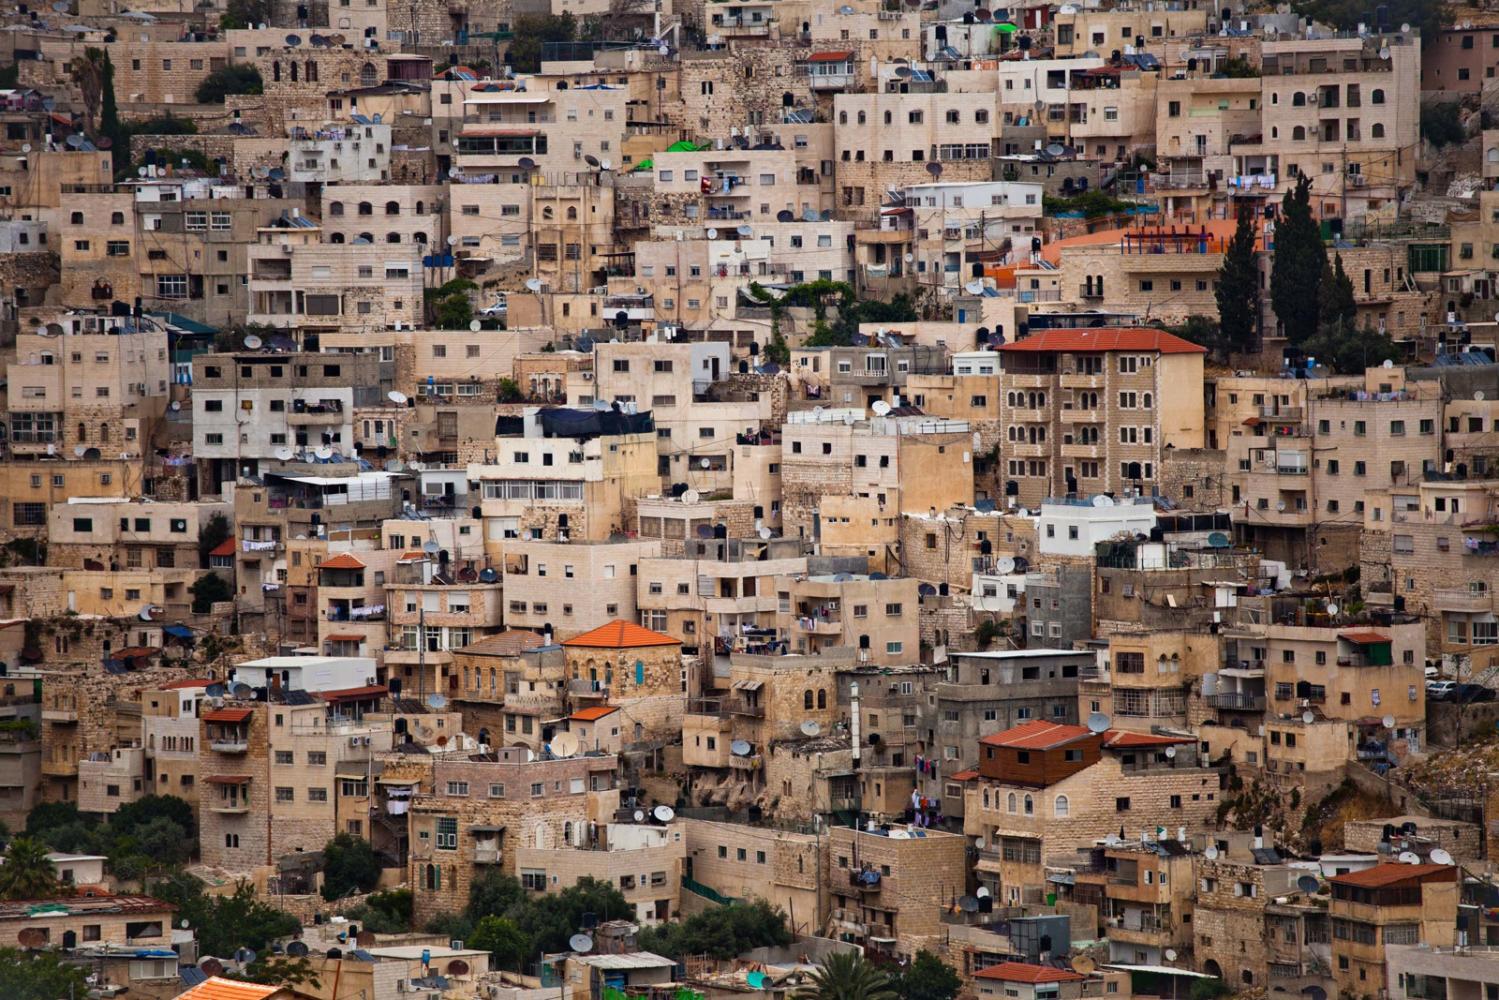 Image from Singles - West Bank, Palestine